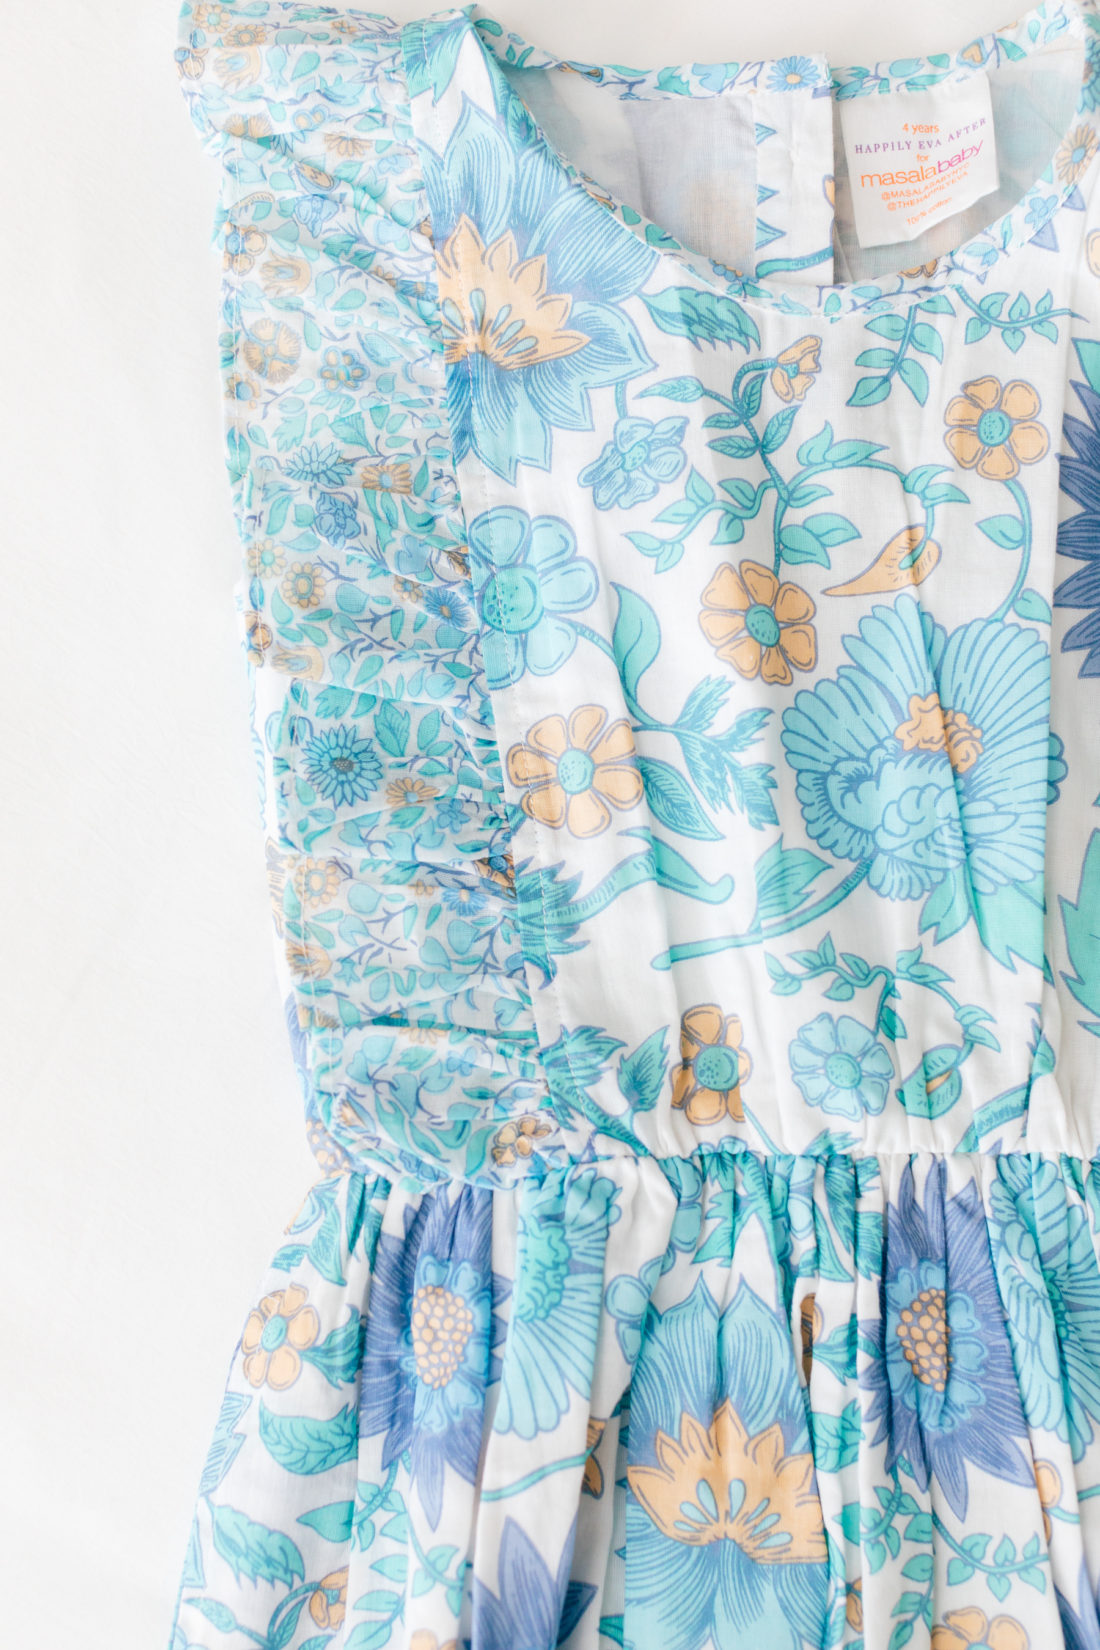 A close up of the detail on the fantasia dress from the Happily Eva After x Masala Baby capsule collection